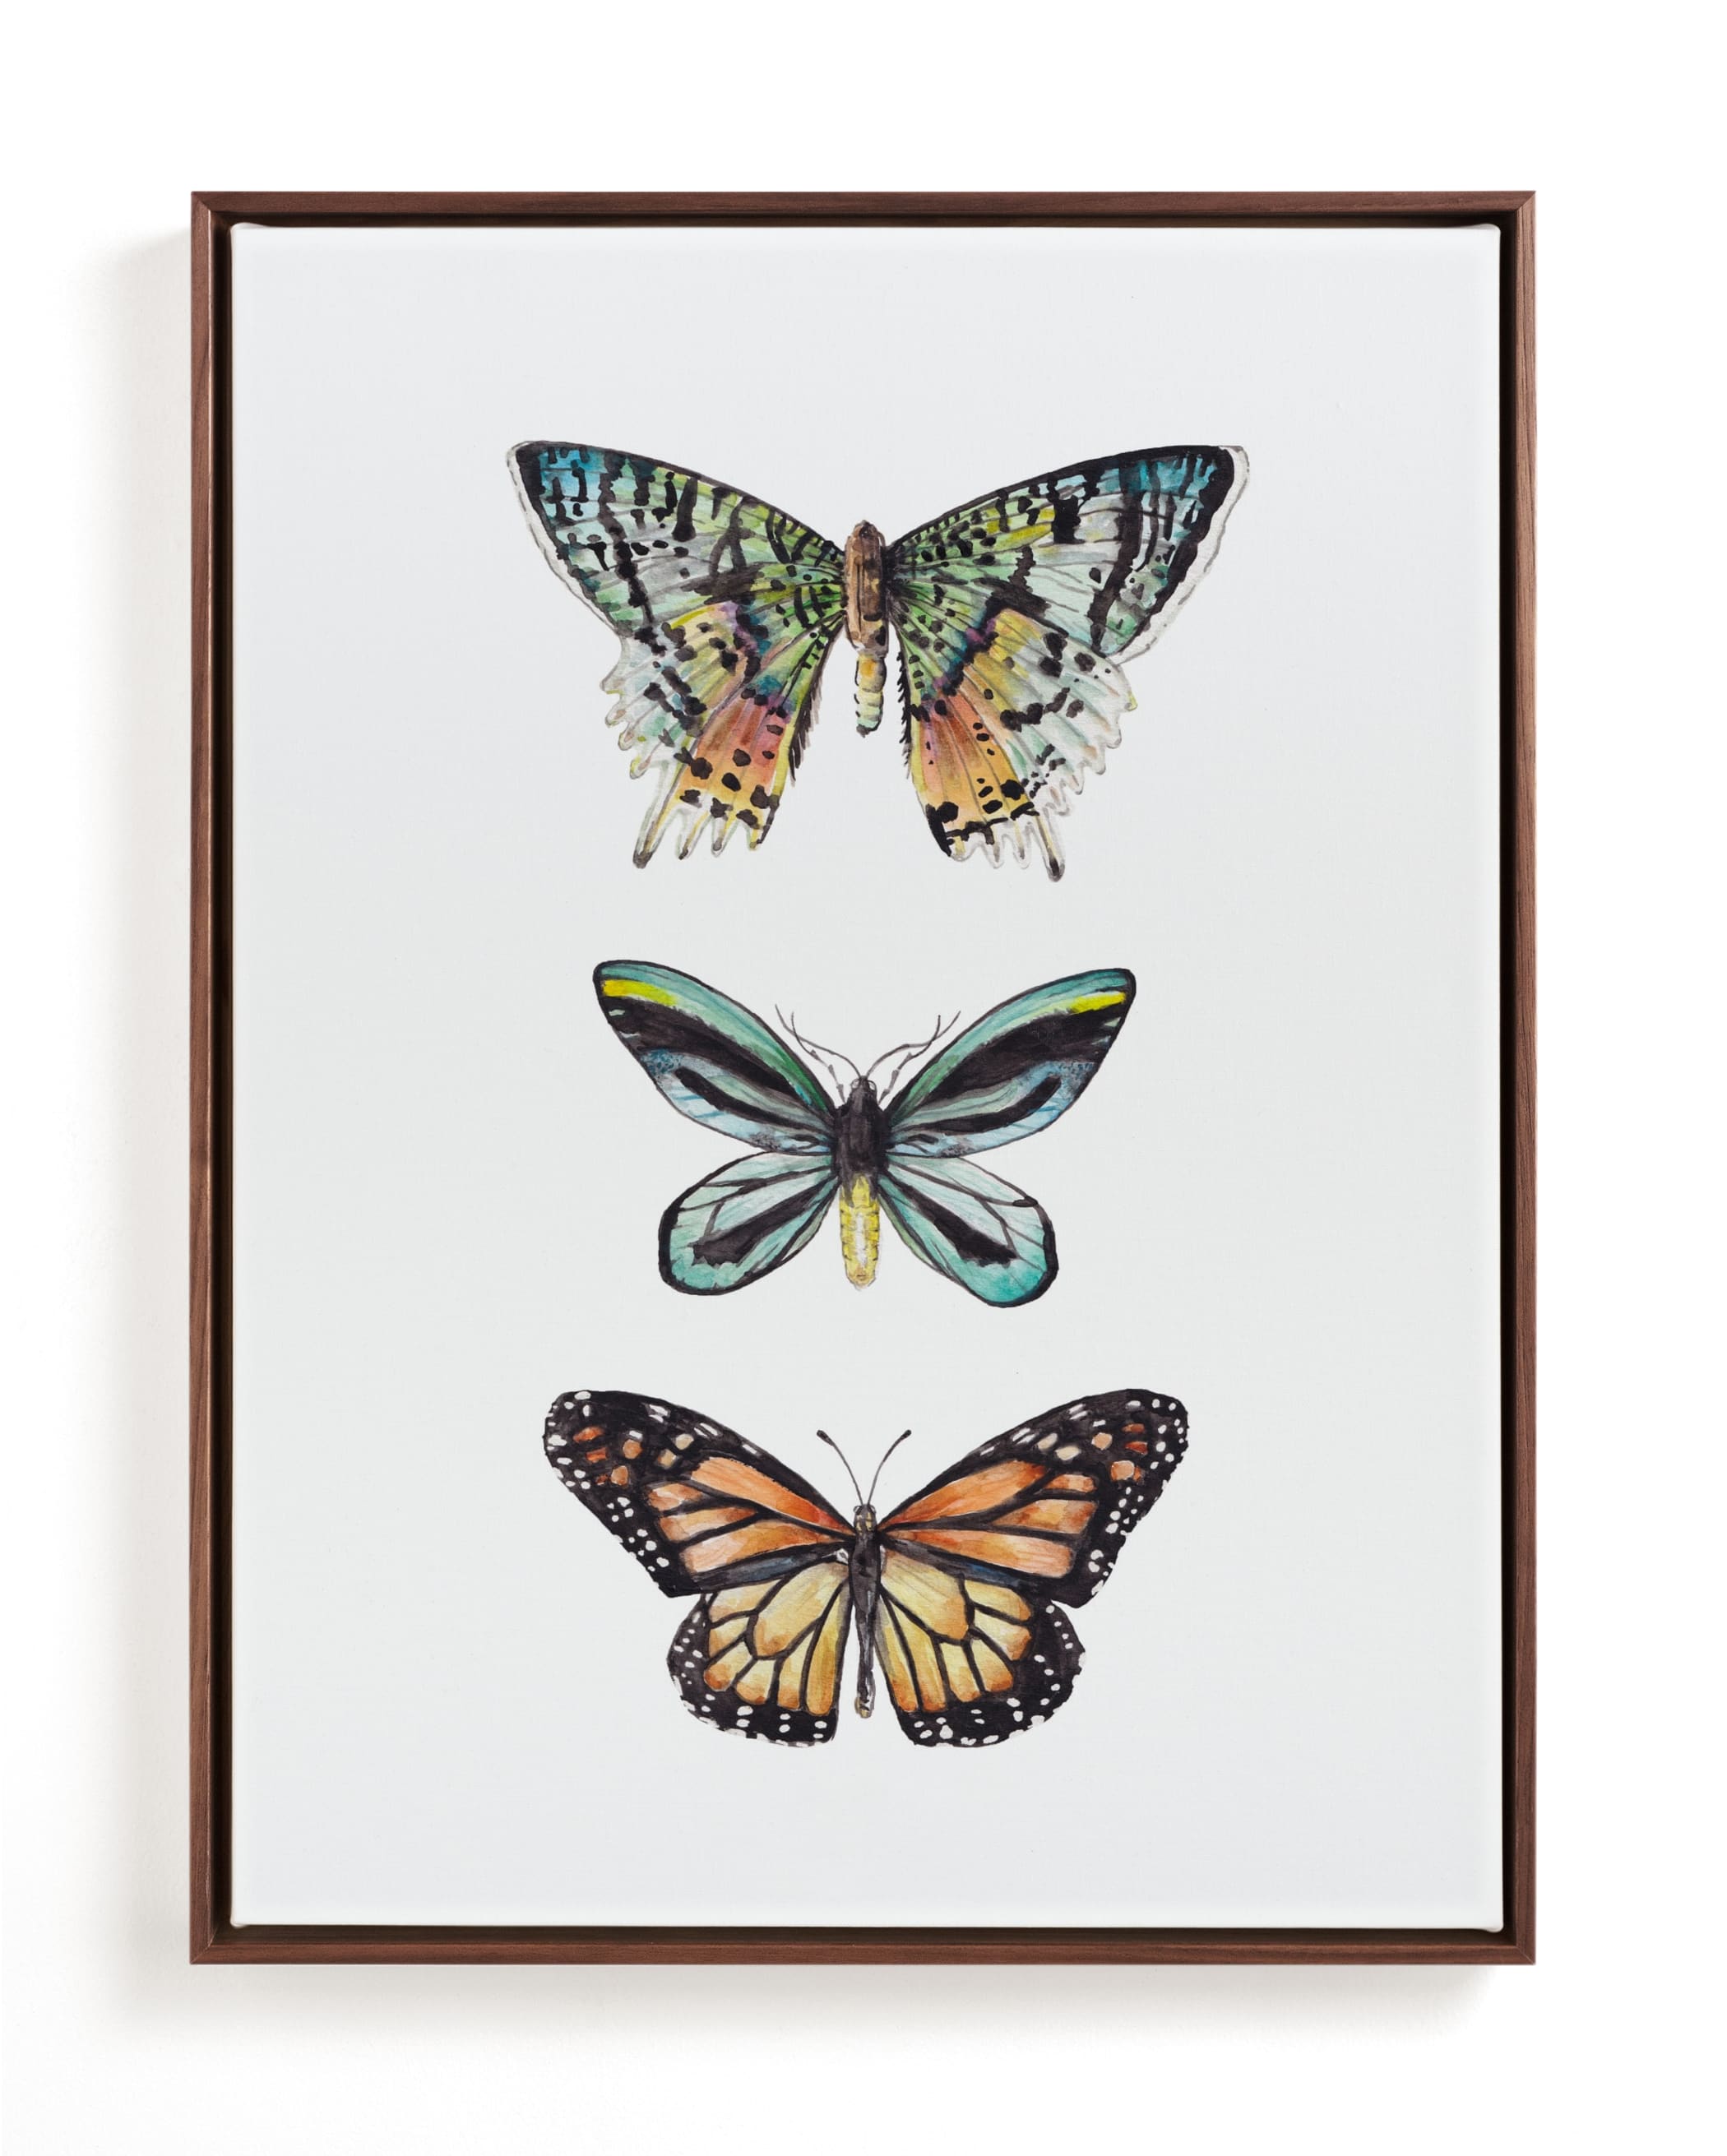 Butterfly Colorful Watercolors Children's Art Print